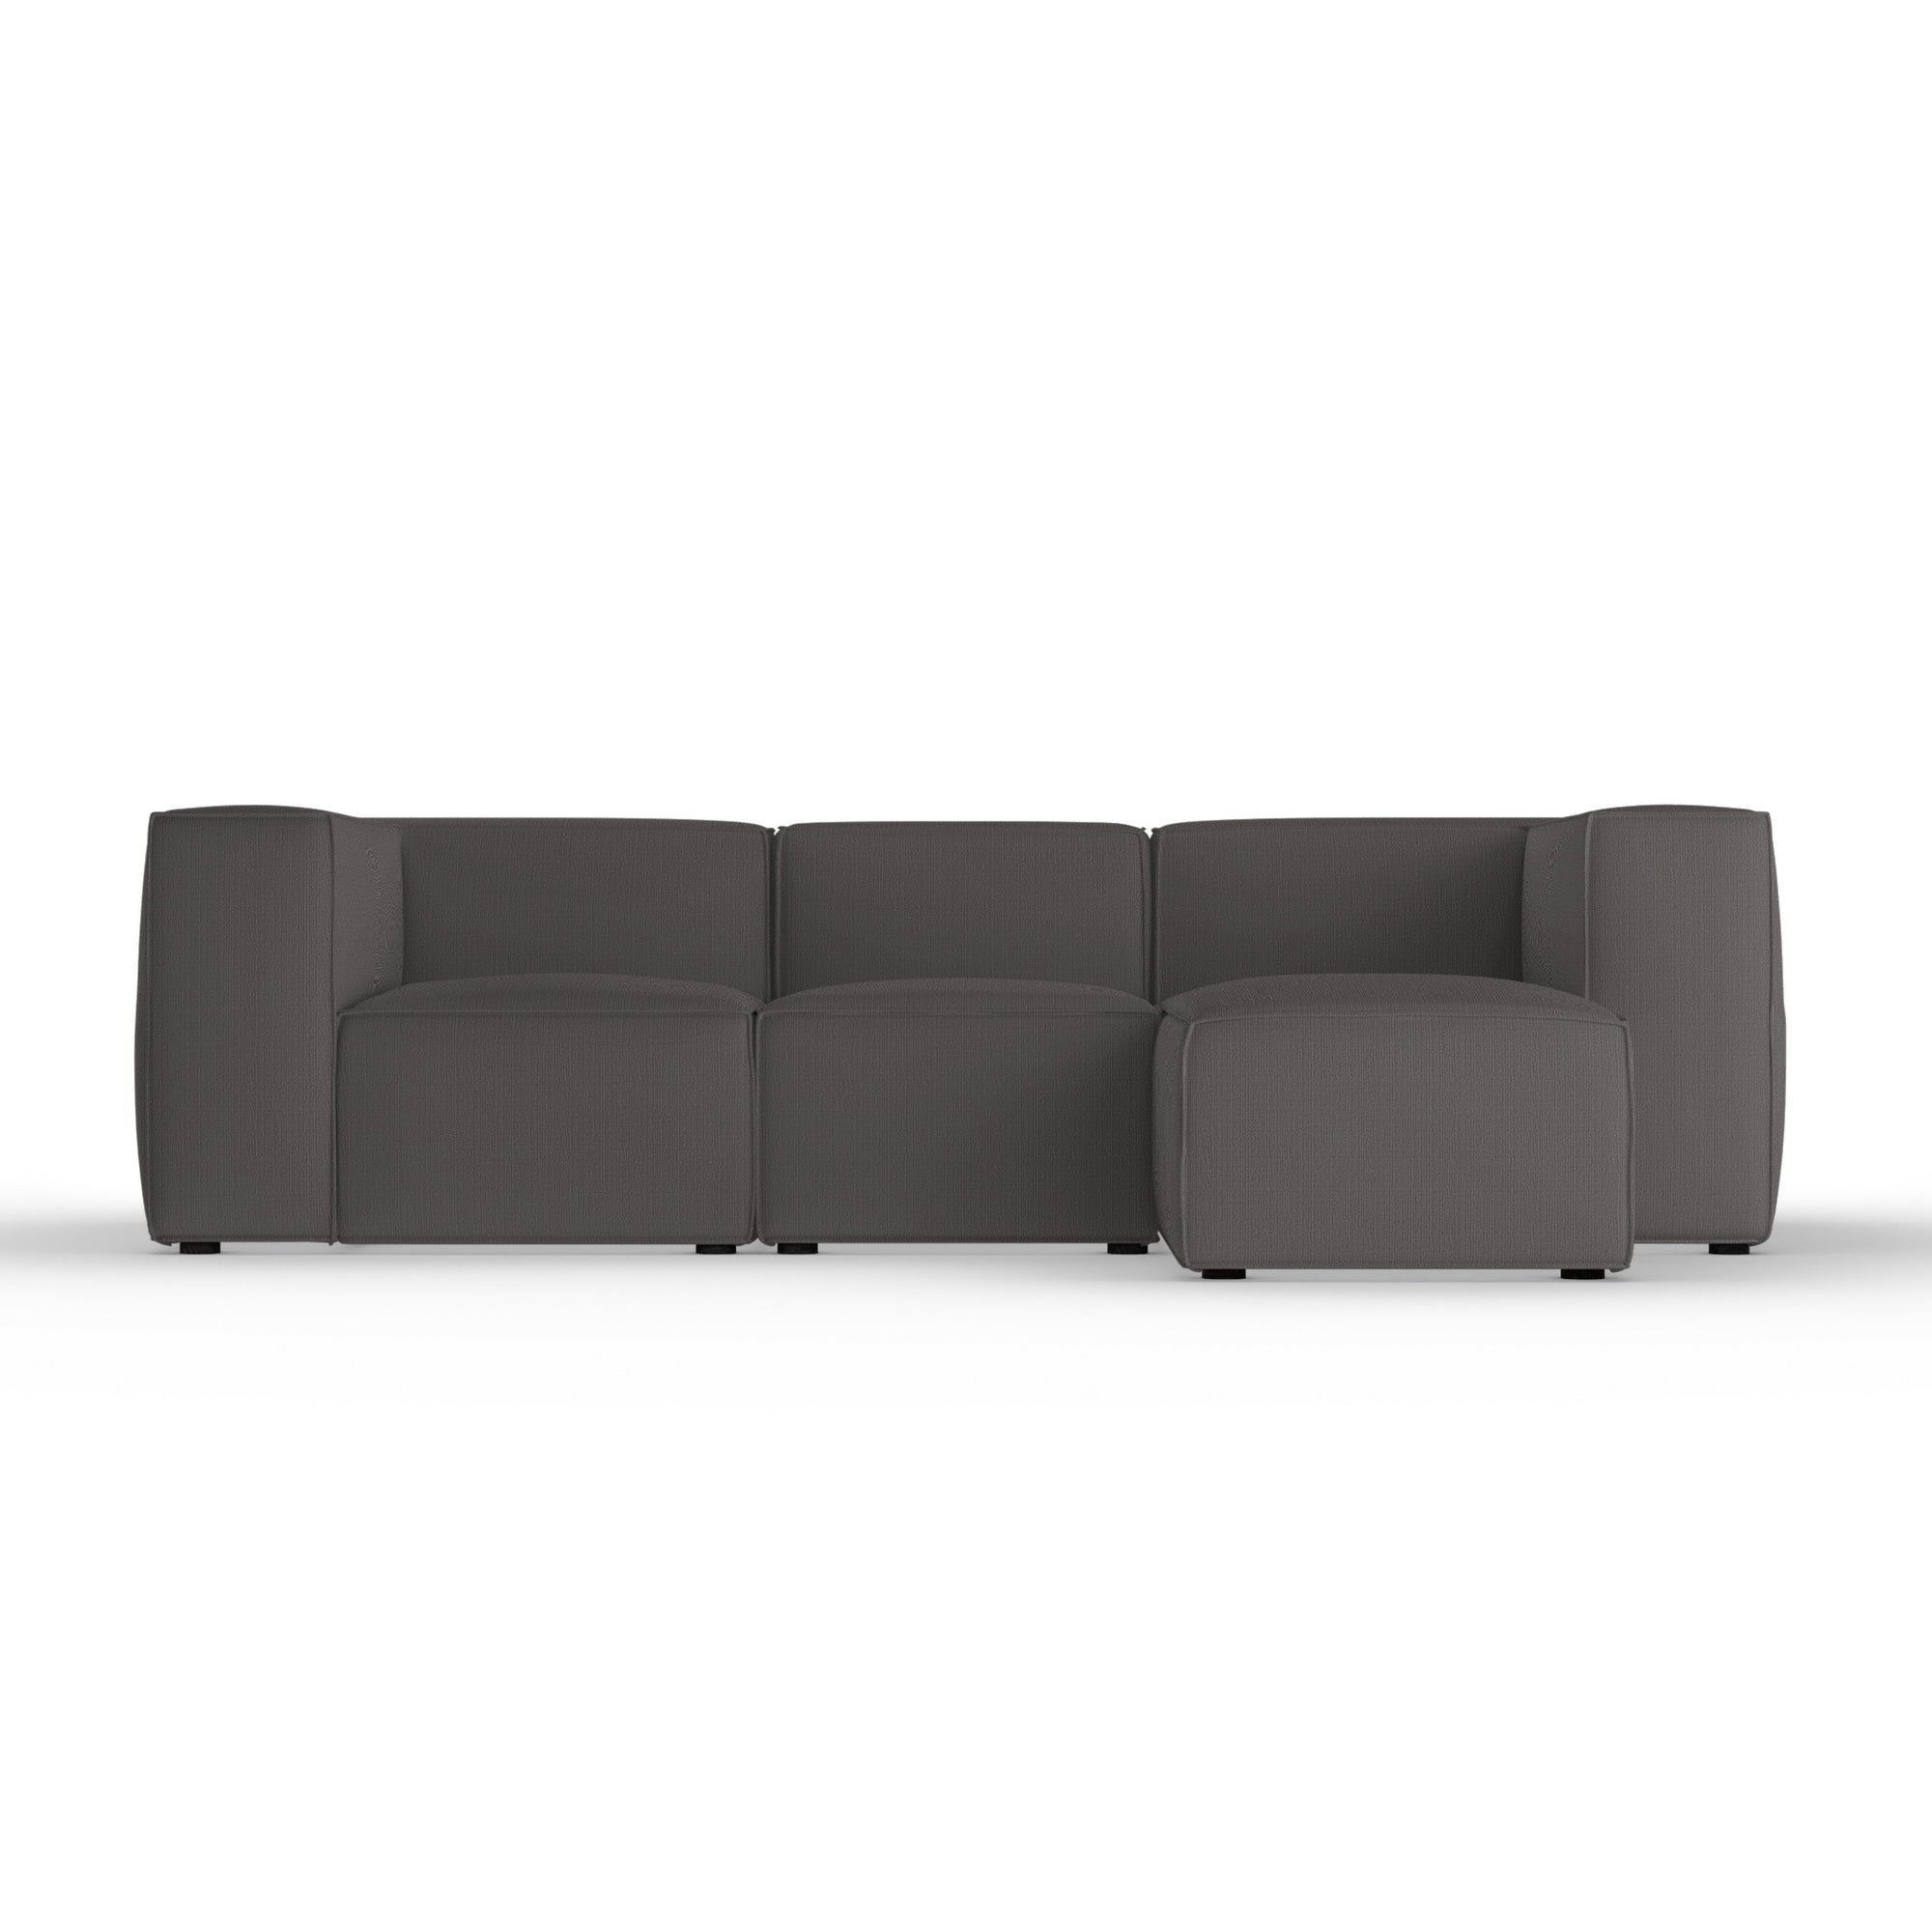 Varick Right-Chaise Sectional - Graphite Box Weave Linen